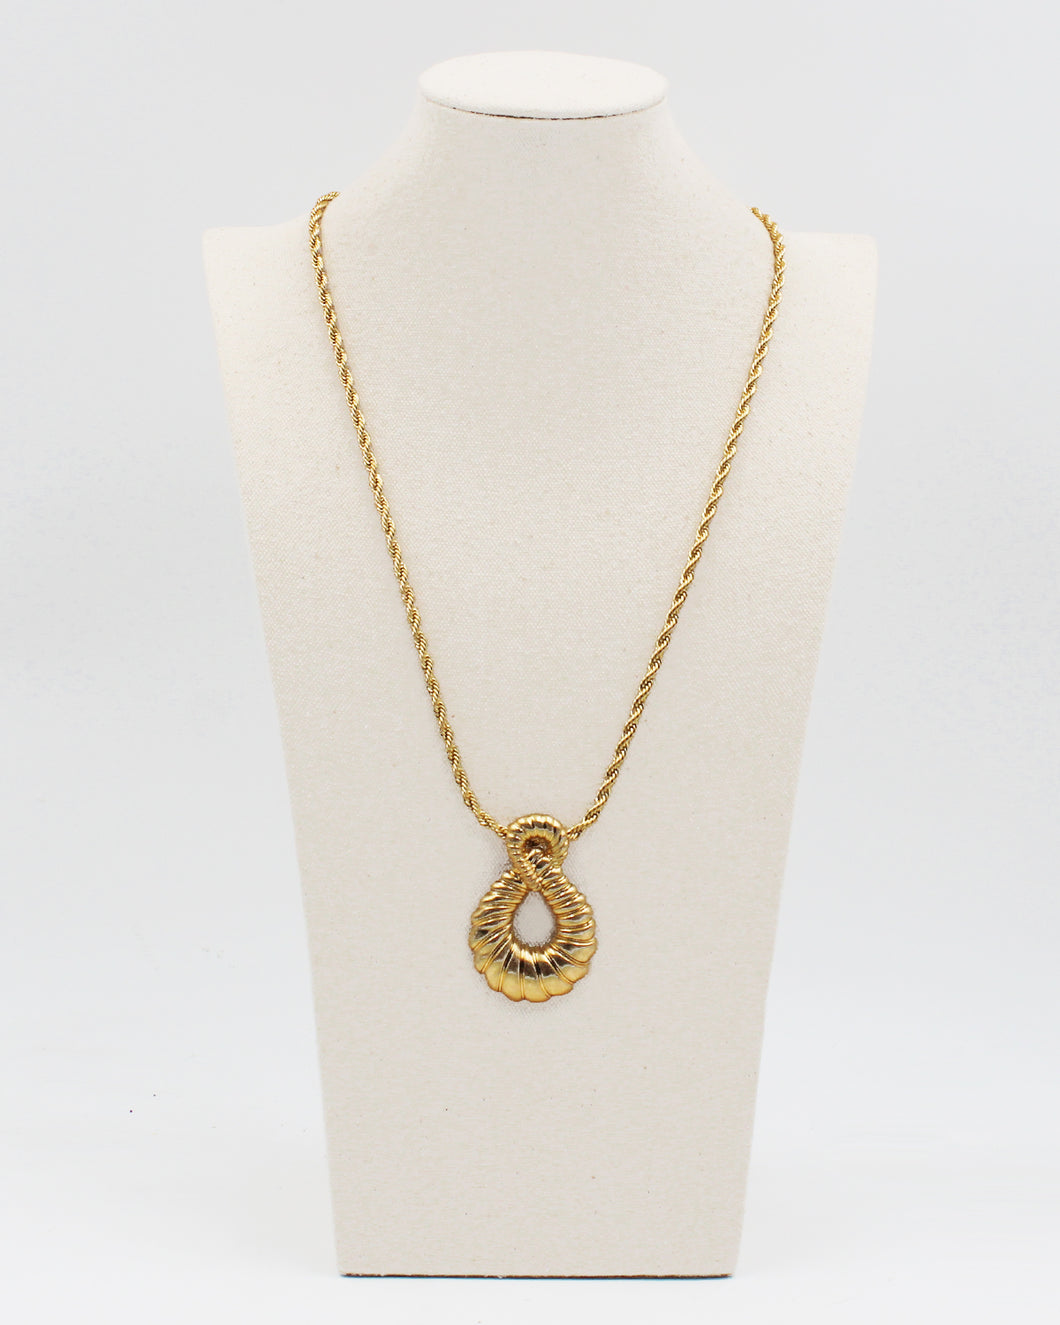 Teardrop Textured Pendant Necklace with Rope Chain